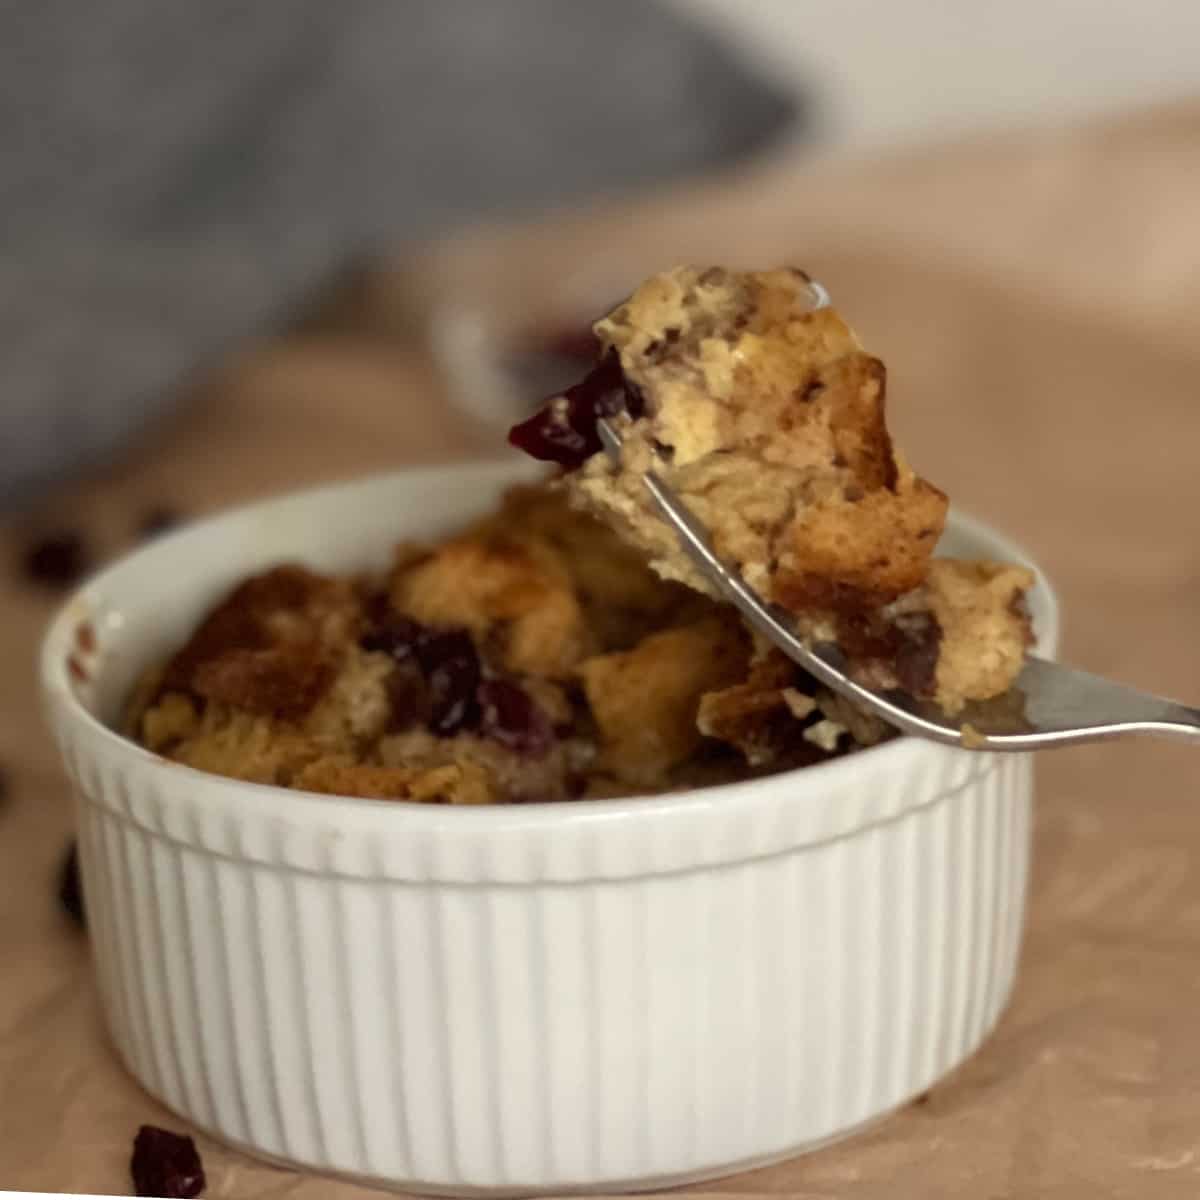 Baked bread pudding in ramekin with forkful of bread pudding.